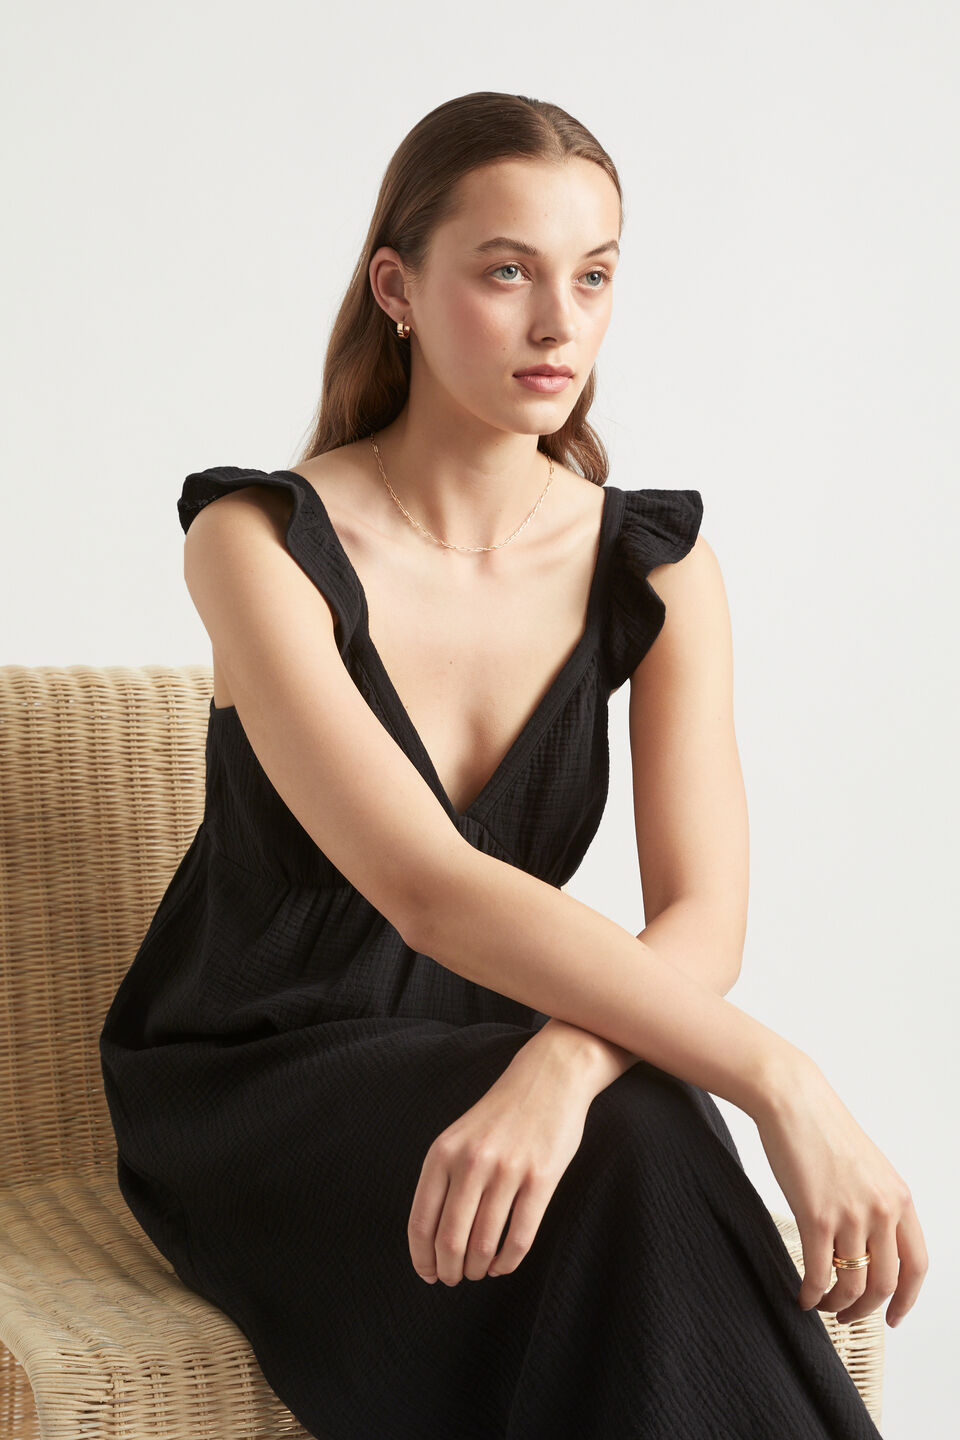 Cheesecloth Frill Detail Maxi Dress  Black